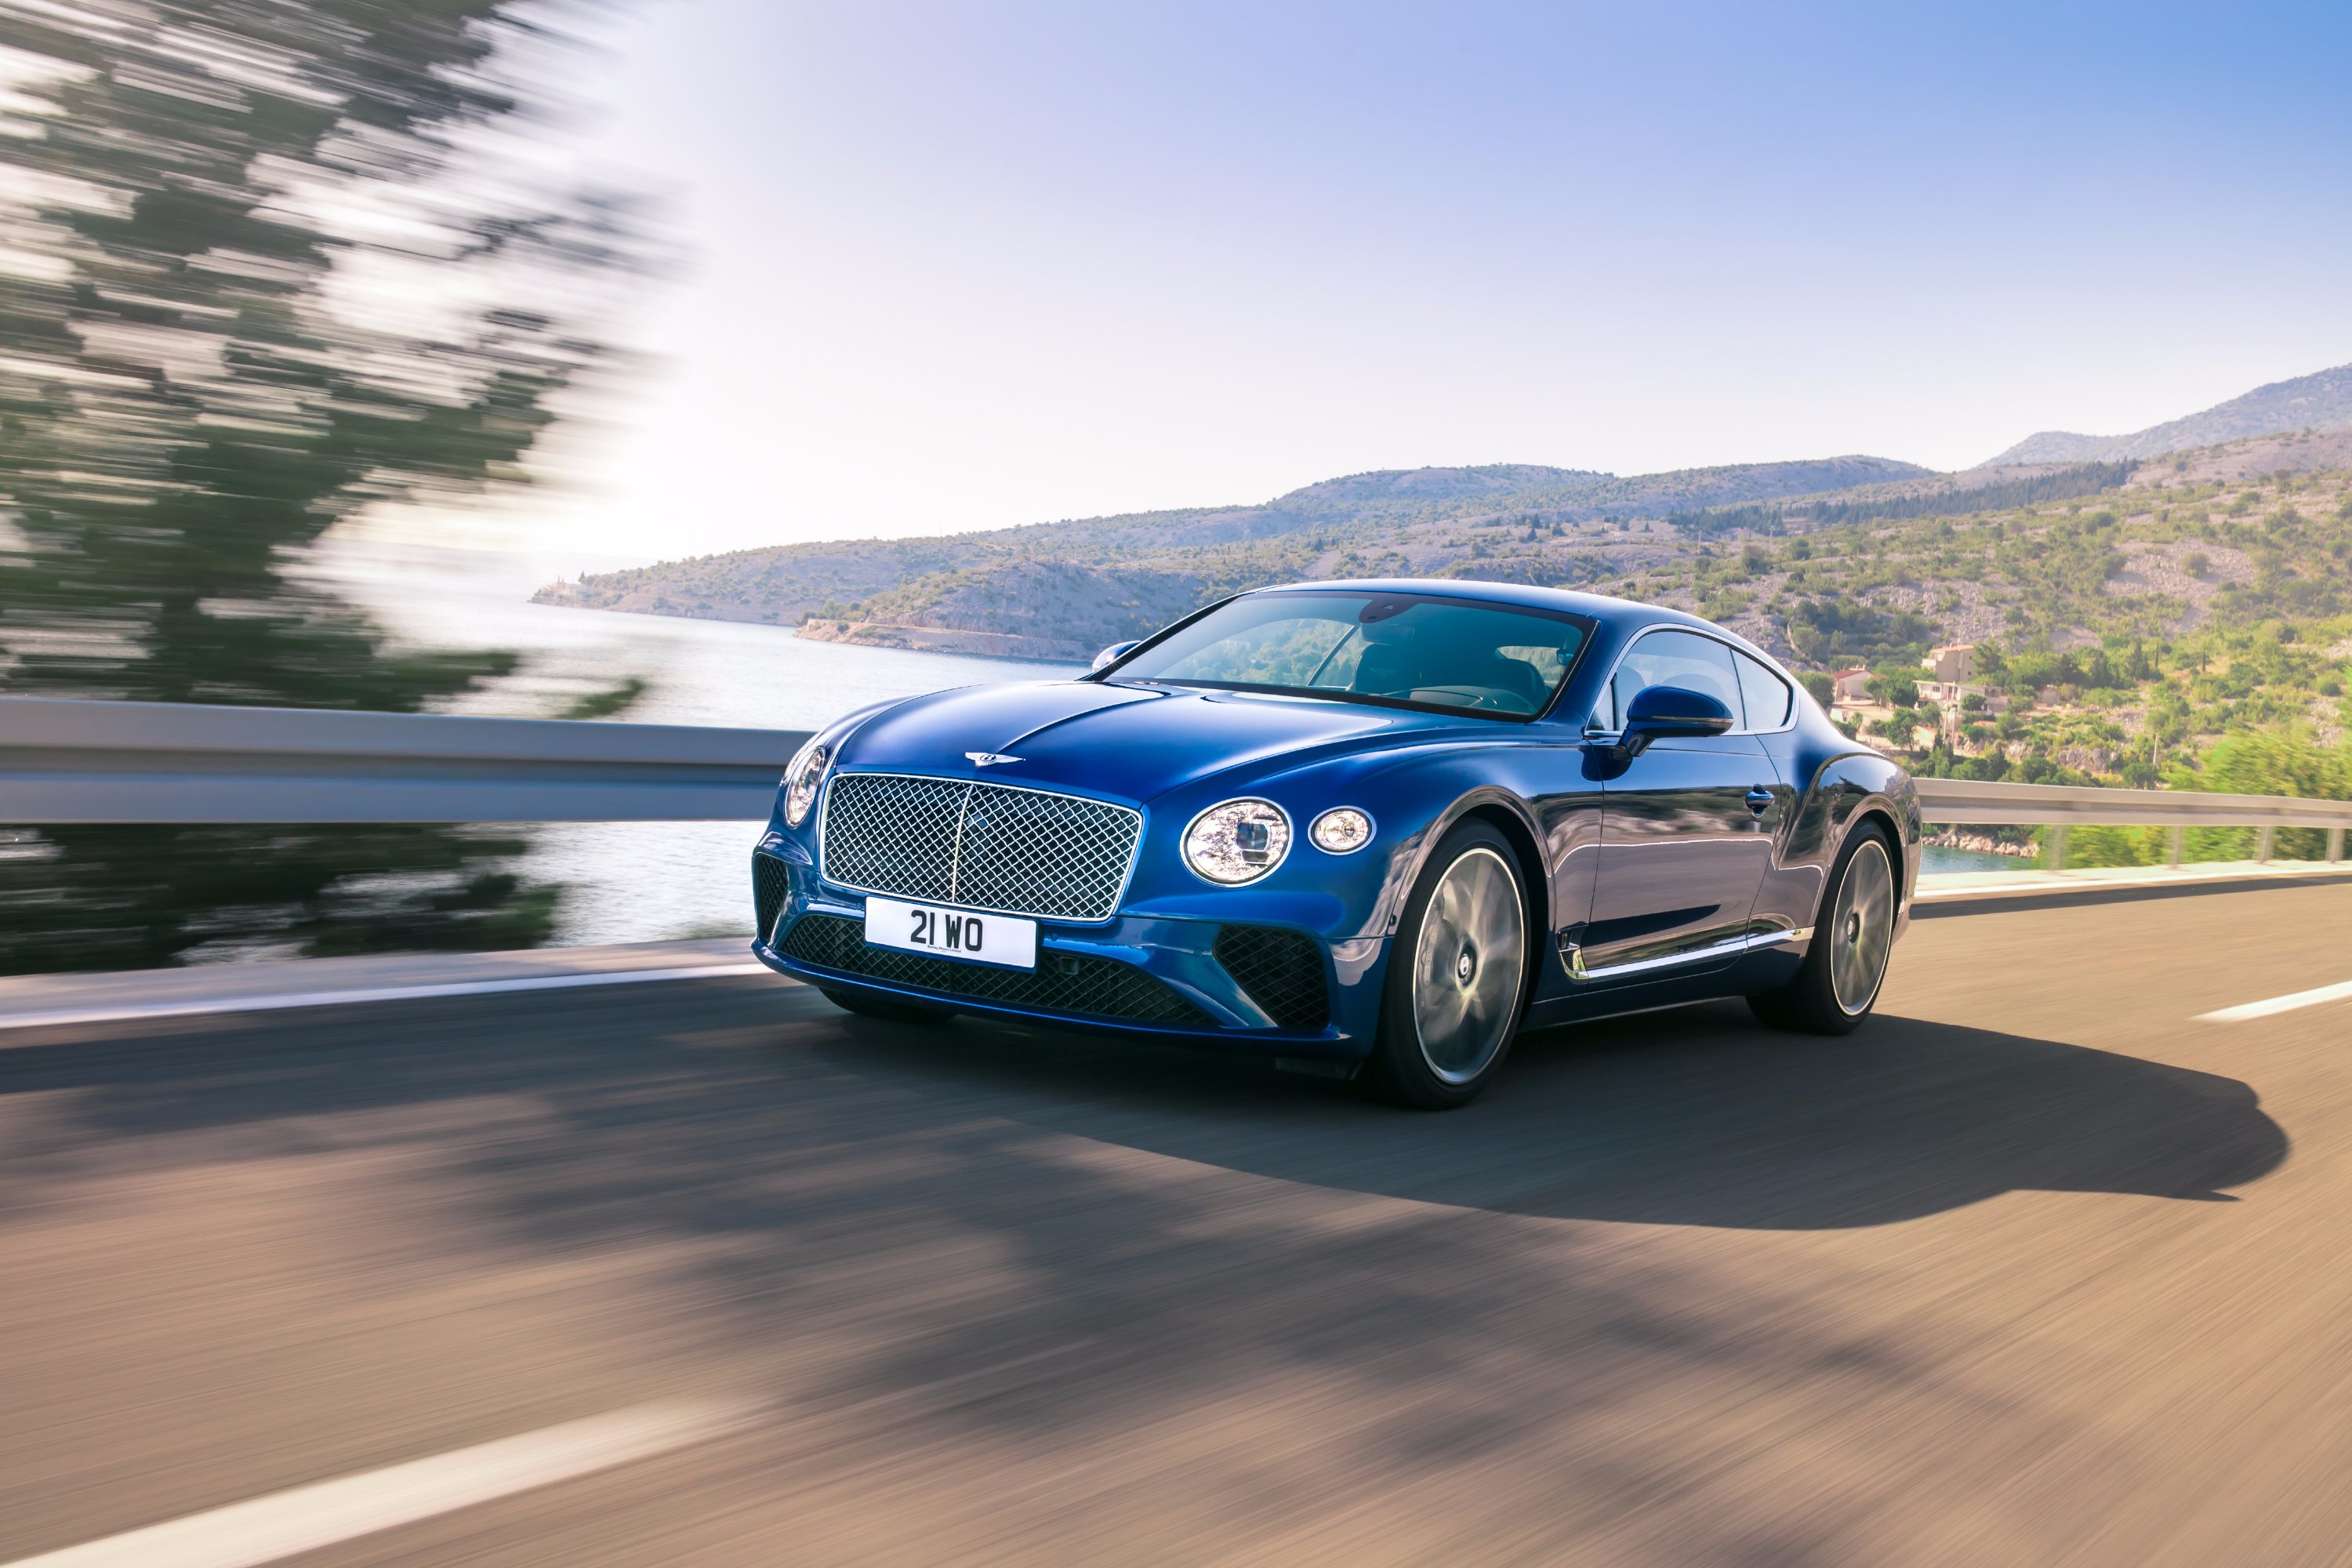 The All-new Bentley Continental Gt – The Definition Of Luxury Grand Touring